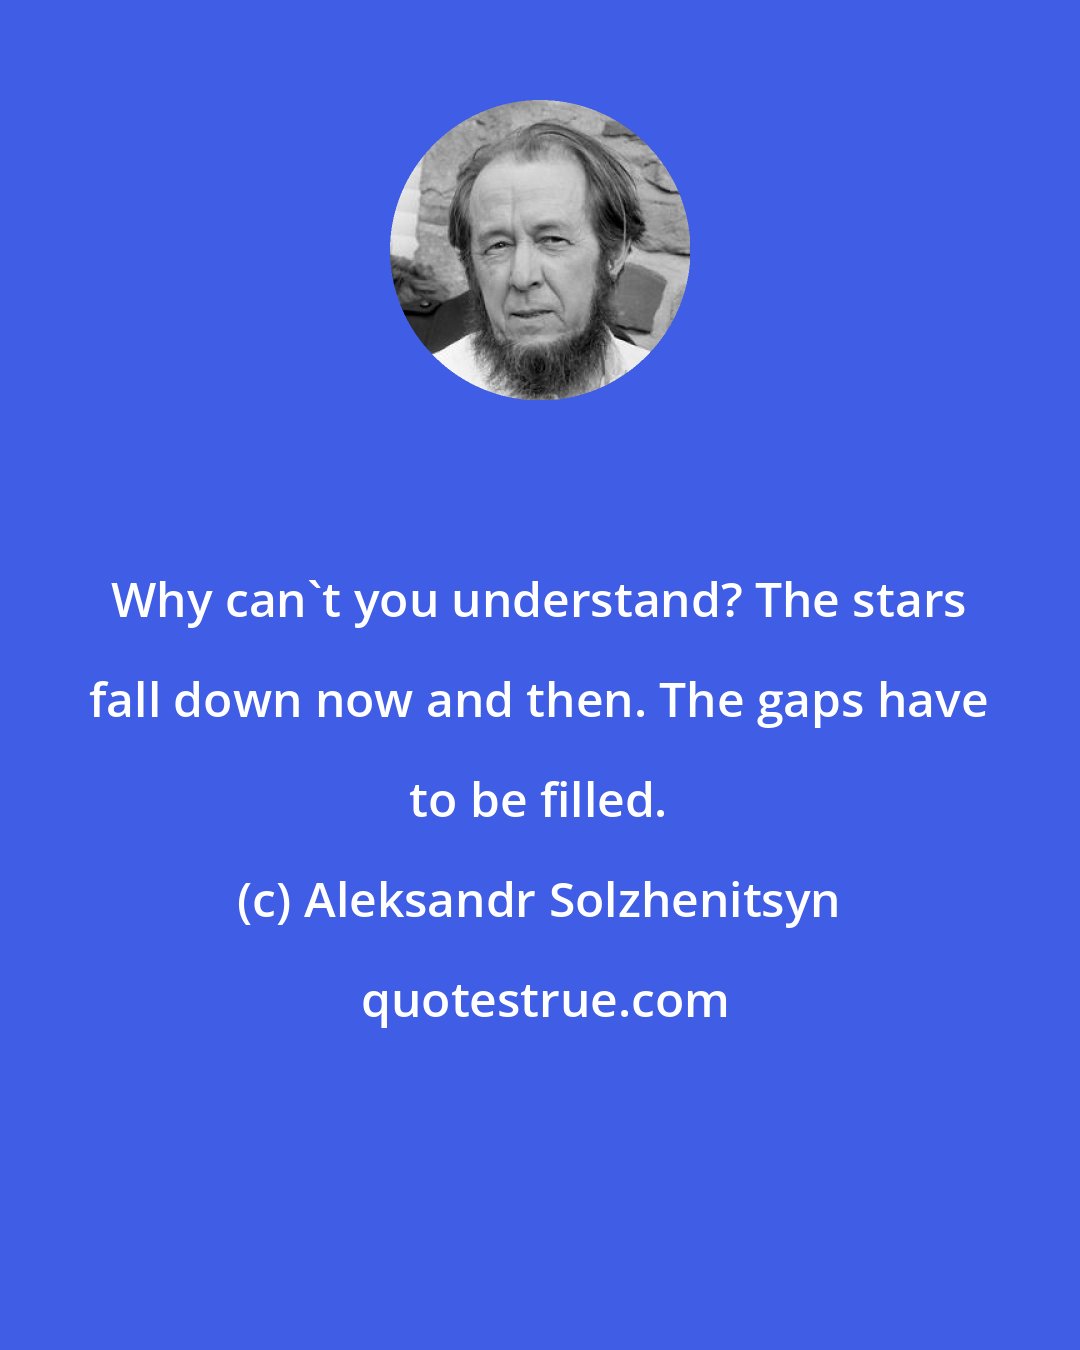 Aleksandr Solzhenitsyn: Why can't you understand? The stars fall down now and then. The gaps have to be filled.